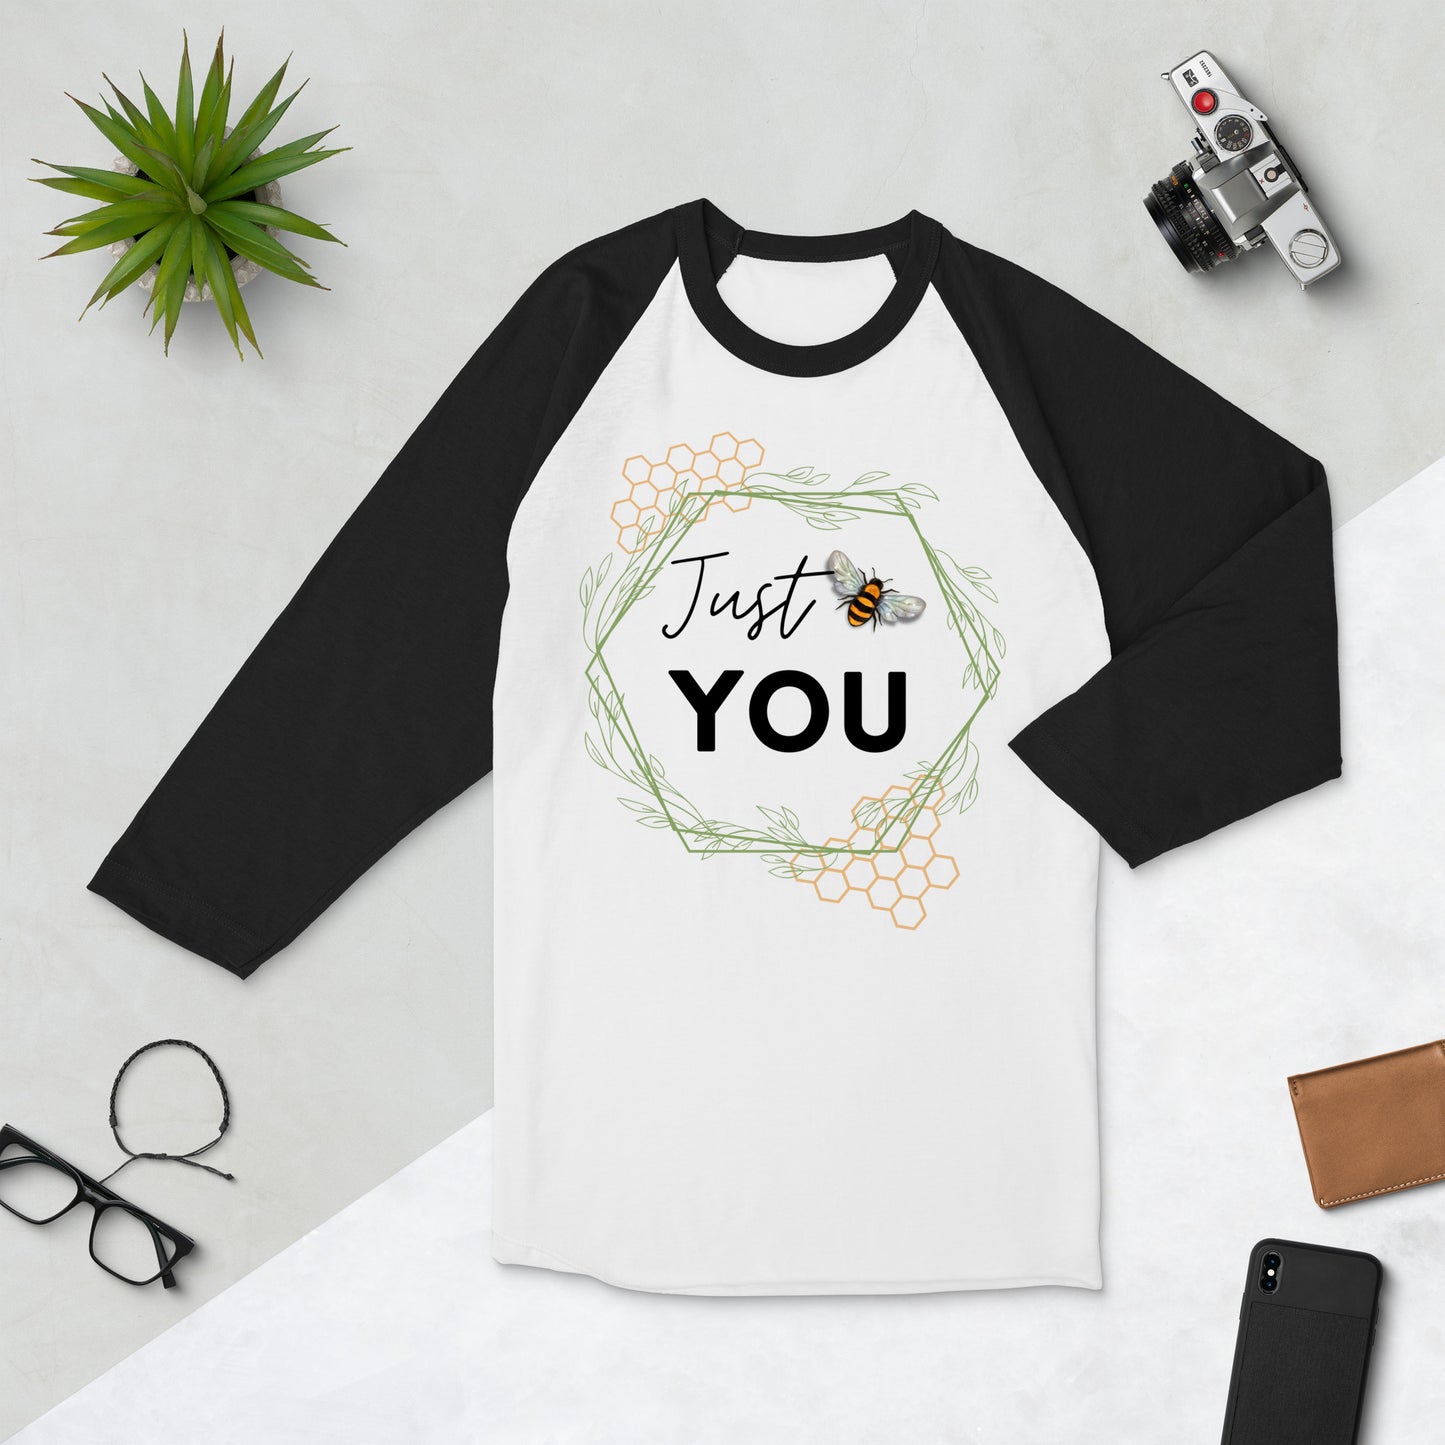 Just "Bee" You Baseball Style Top - Adult